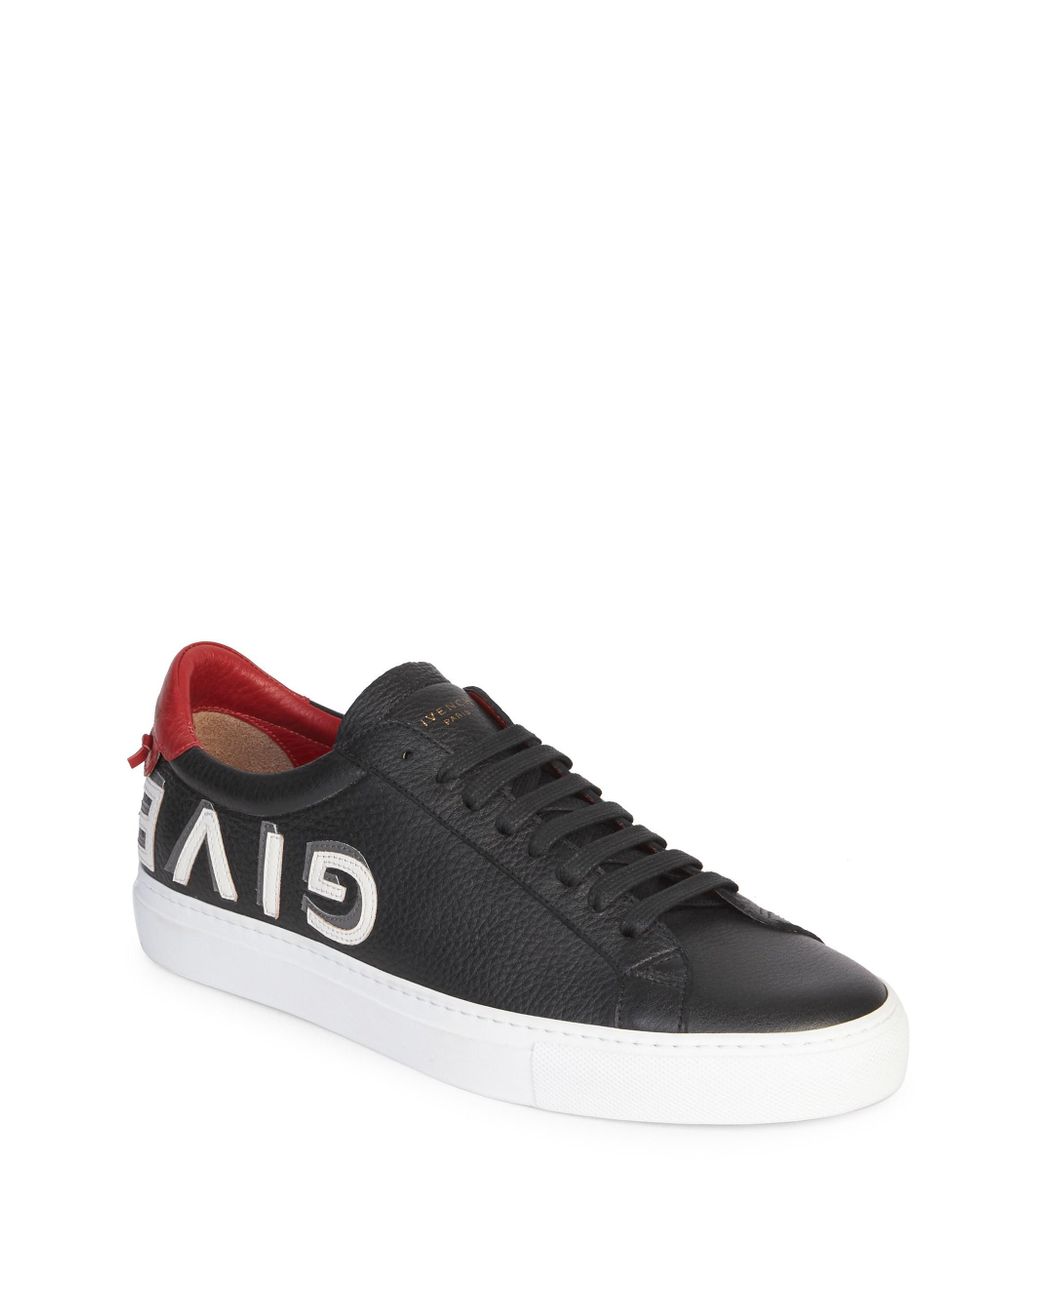 Givenchy Leather Sneakers Black Urban Street for Men - Save 55% - Lyst